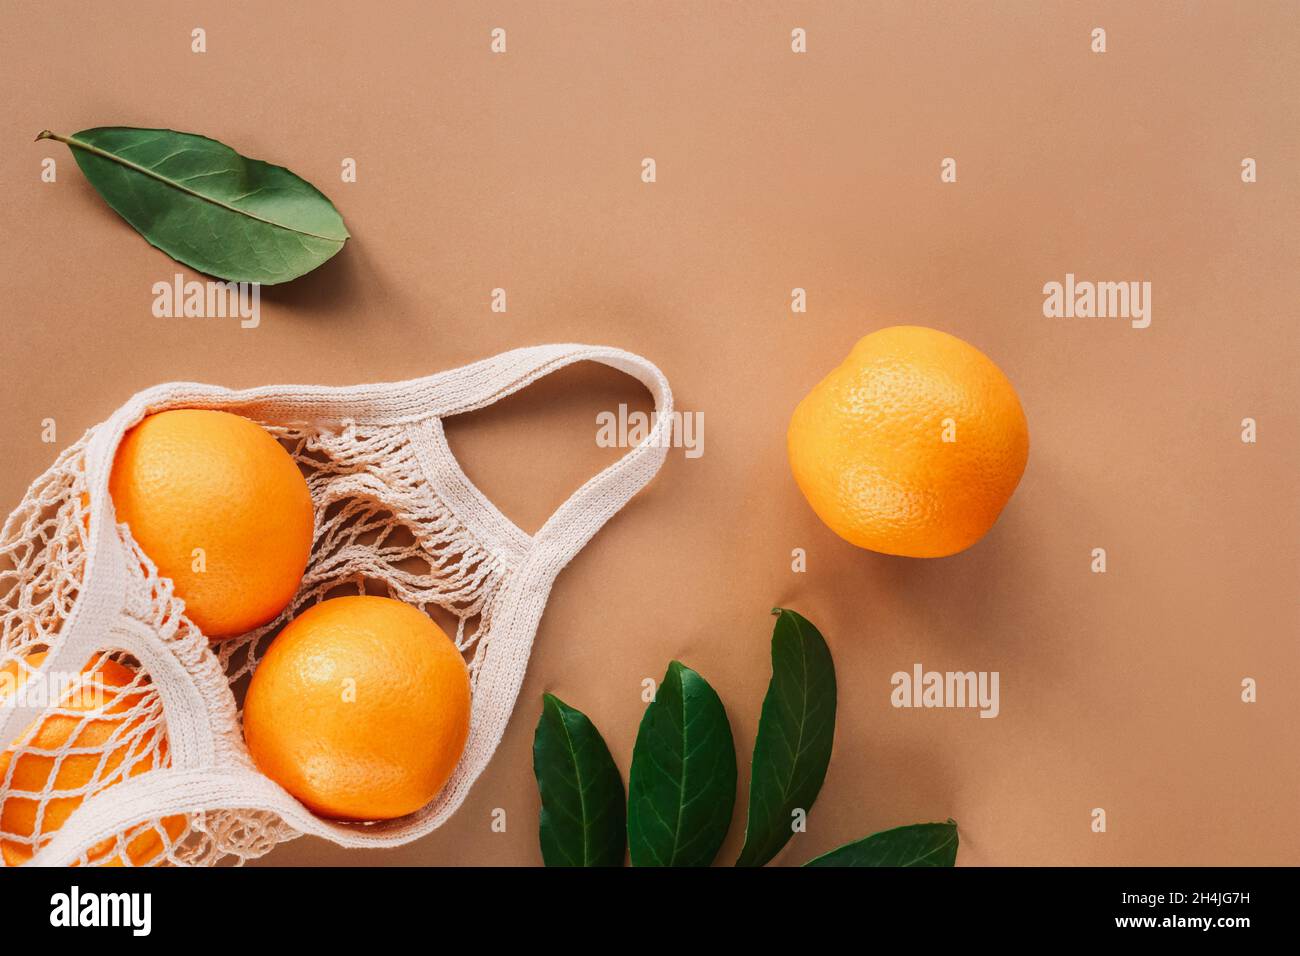 https://c8.alamy.com/comp/2H4JG7H/oranges-in-a-string-bag-with-green-leaves-on-tan-beige-background-top-view-flat-lay-2H4JG7H.jpg